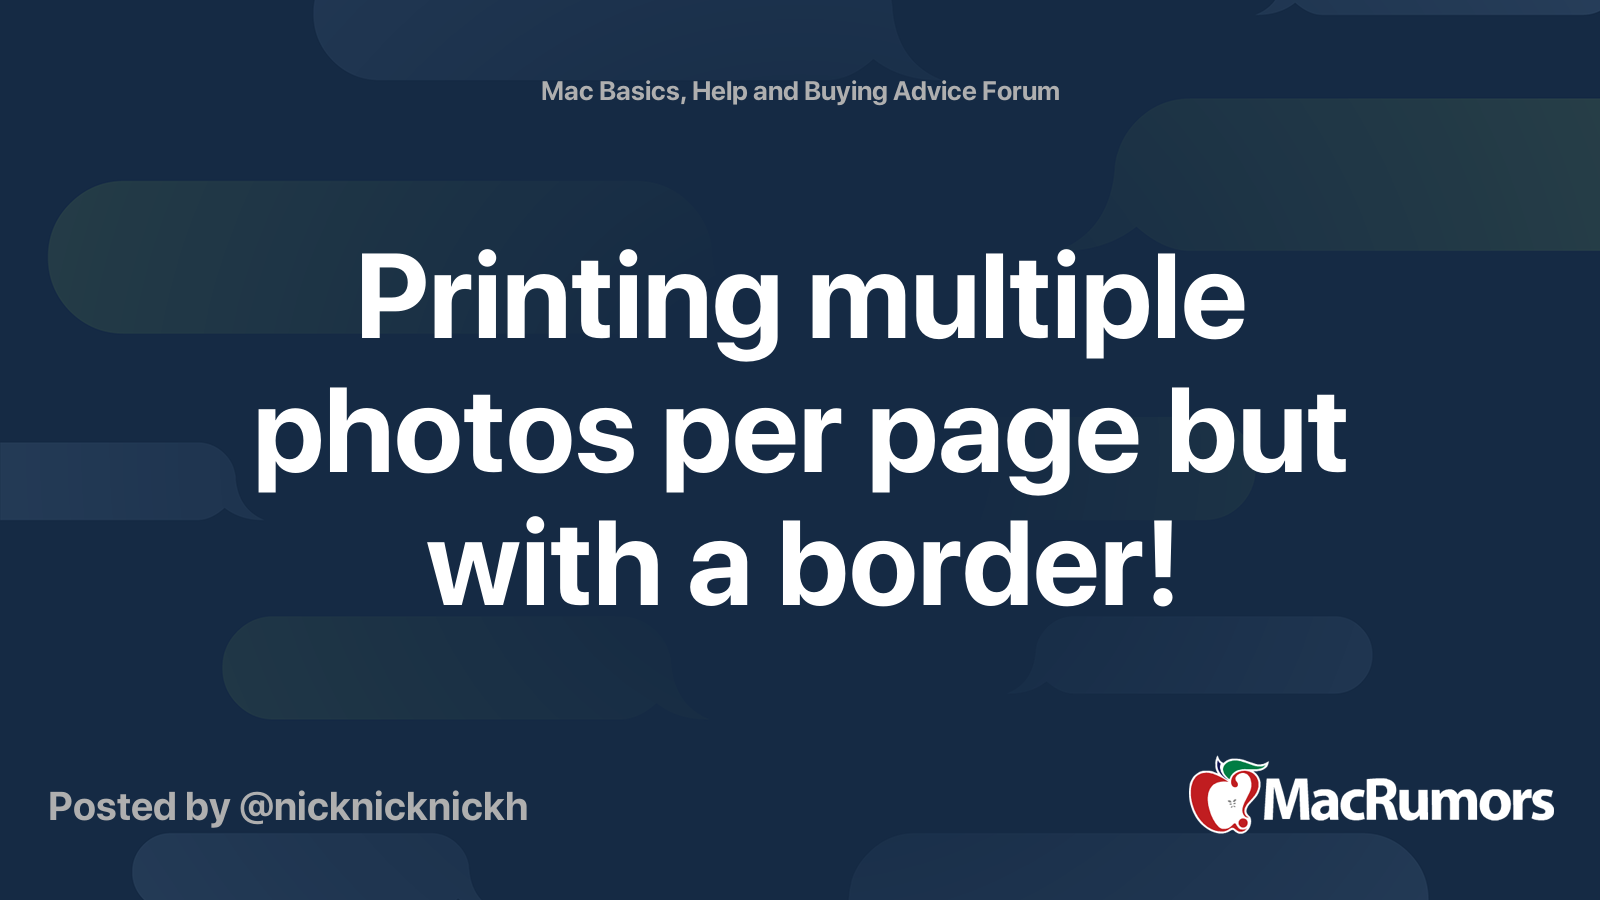 printing-multiple-photos-per-page-but-with-a-border-macrumors-forums